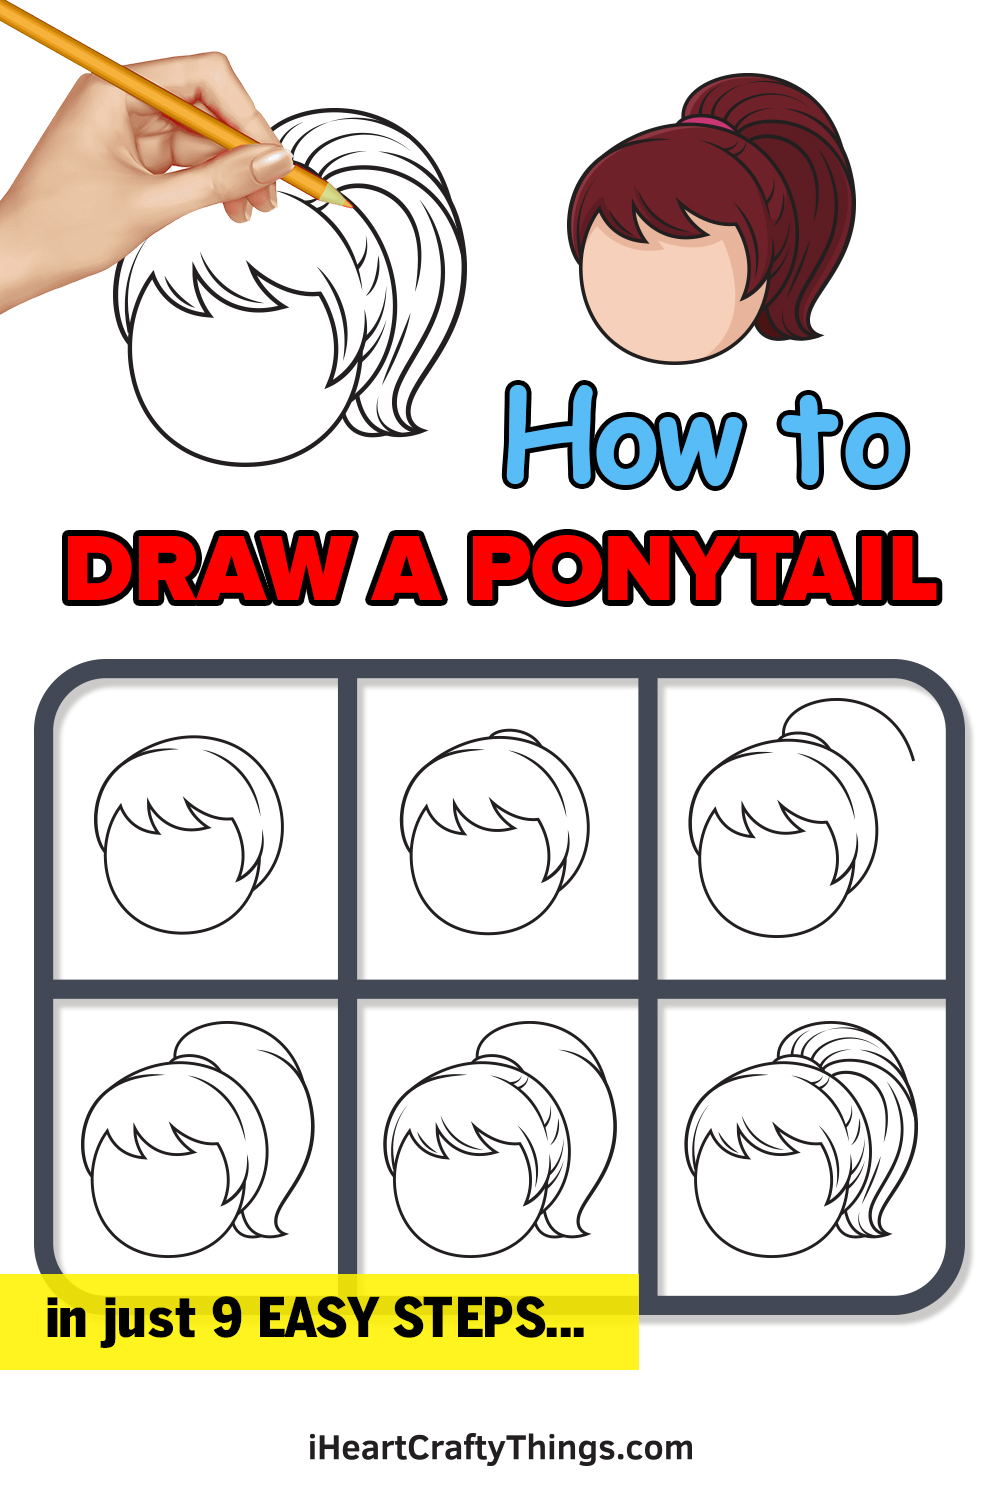 how to draw a ponytail in 9 easy steps